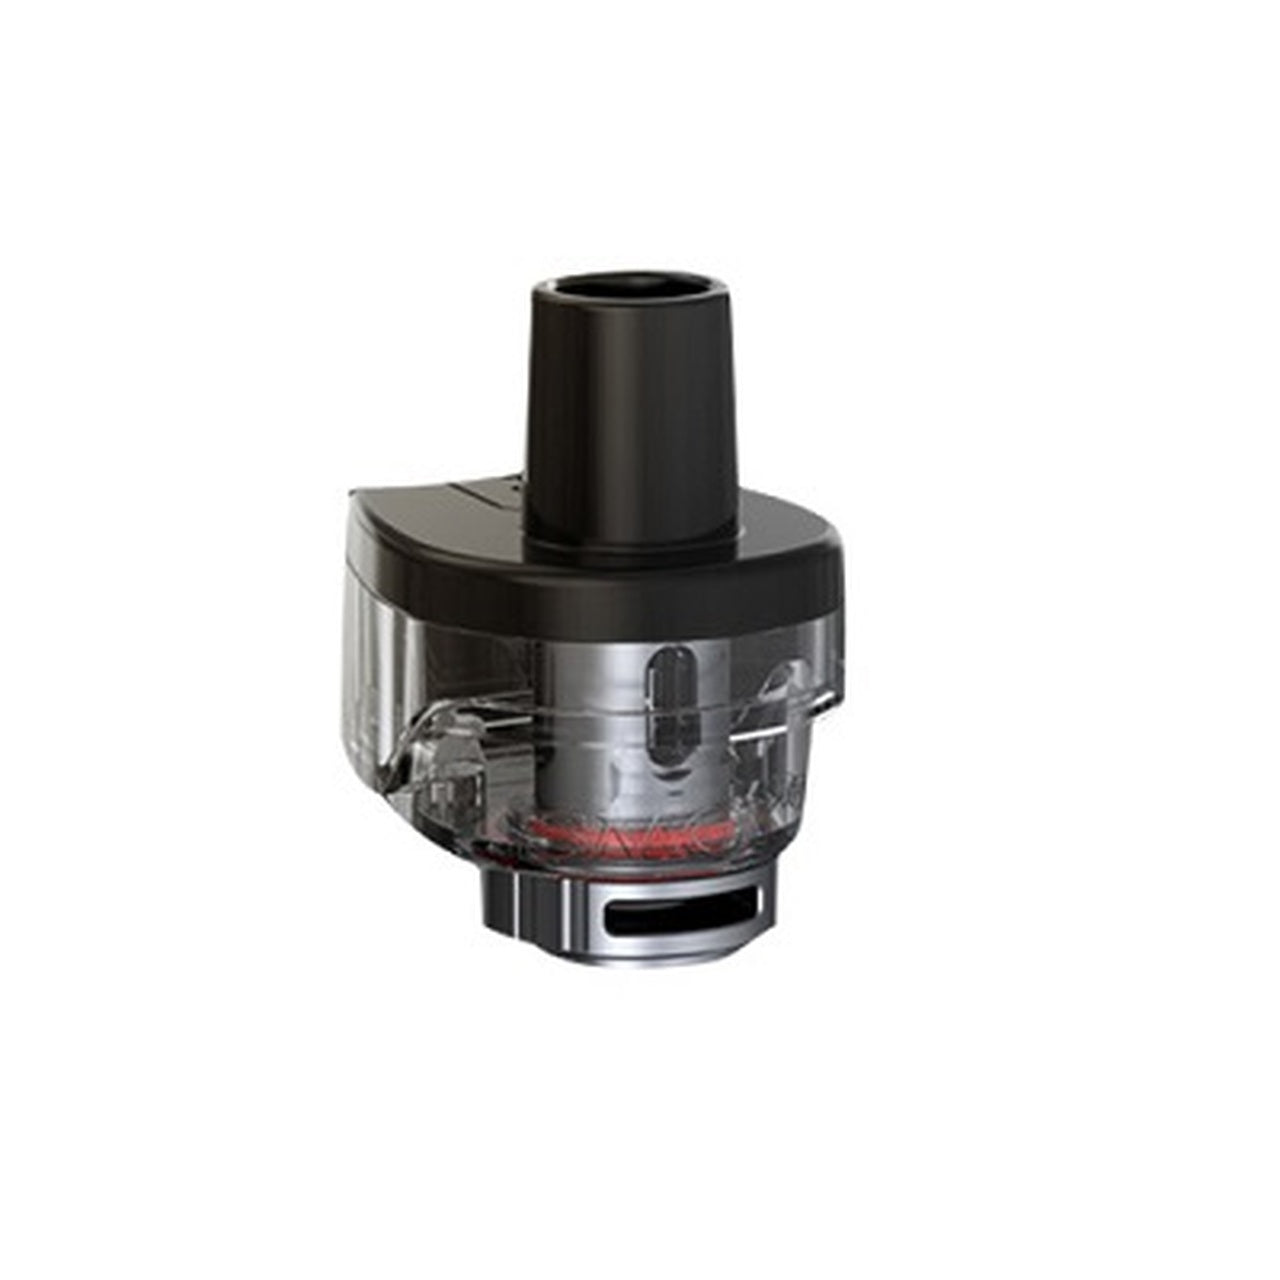 SMOK | RPM80 RGC POD COIL NOT INCLUDED | BOX OF 3